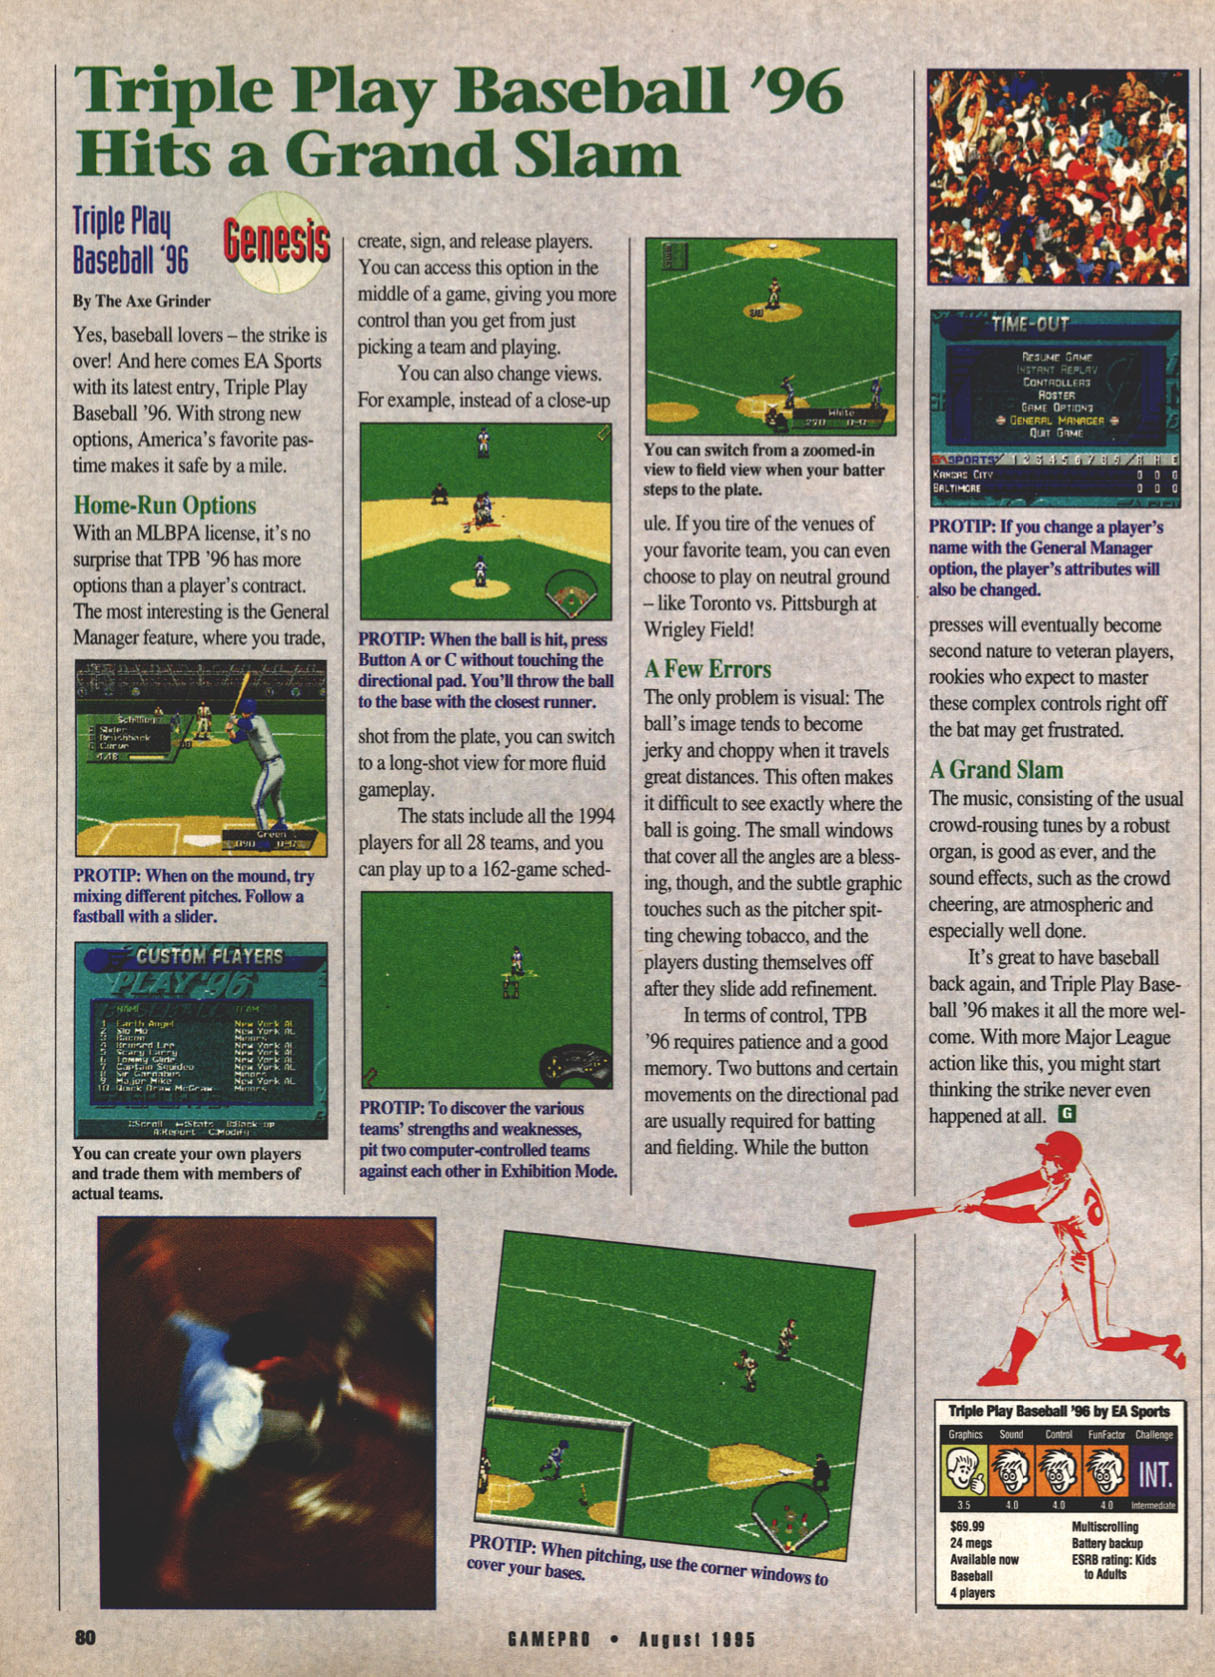 Triple Play Baseball '96 Hits a Grand Slam, GamePro August 1995 page 80